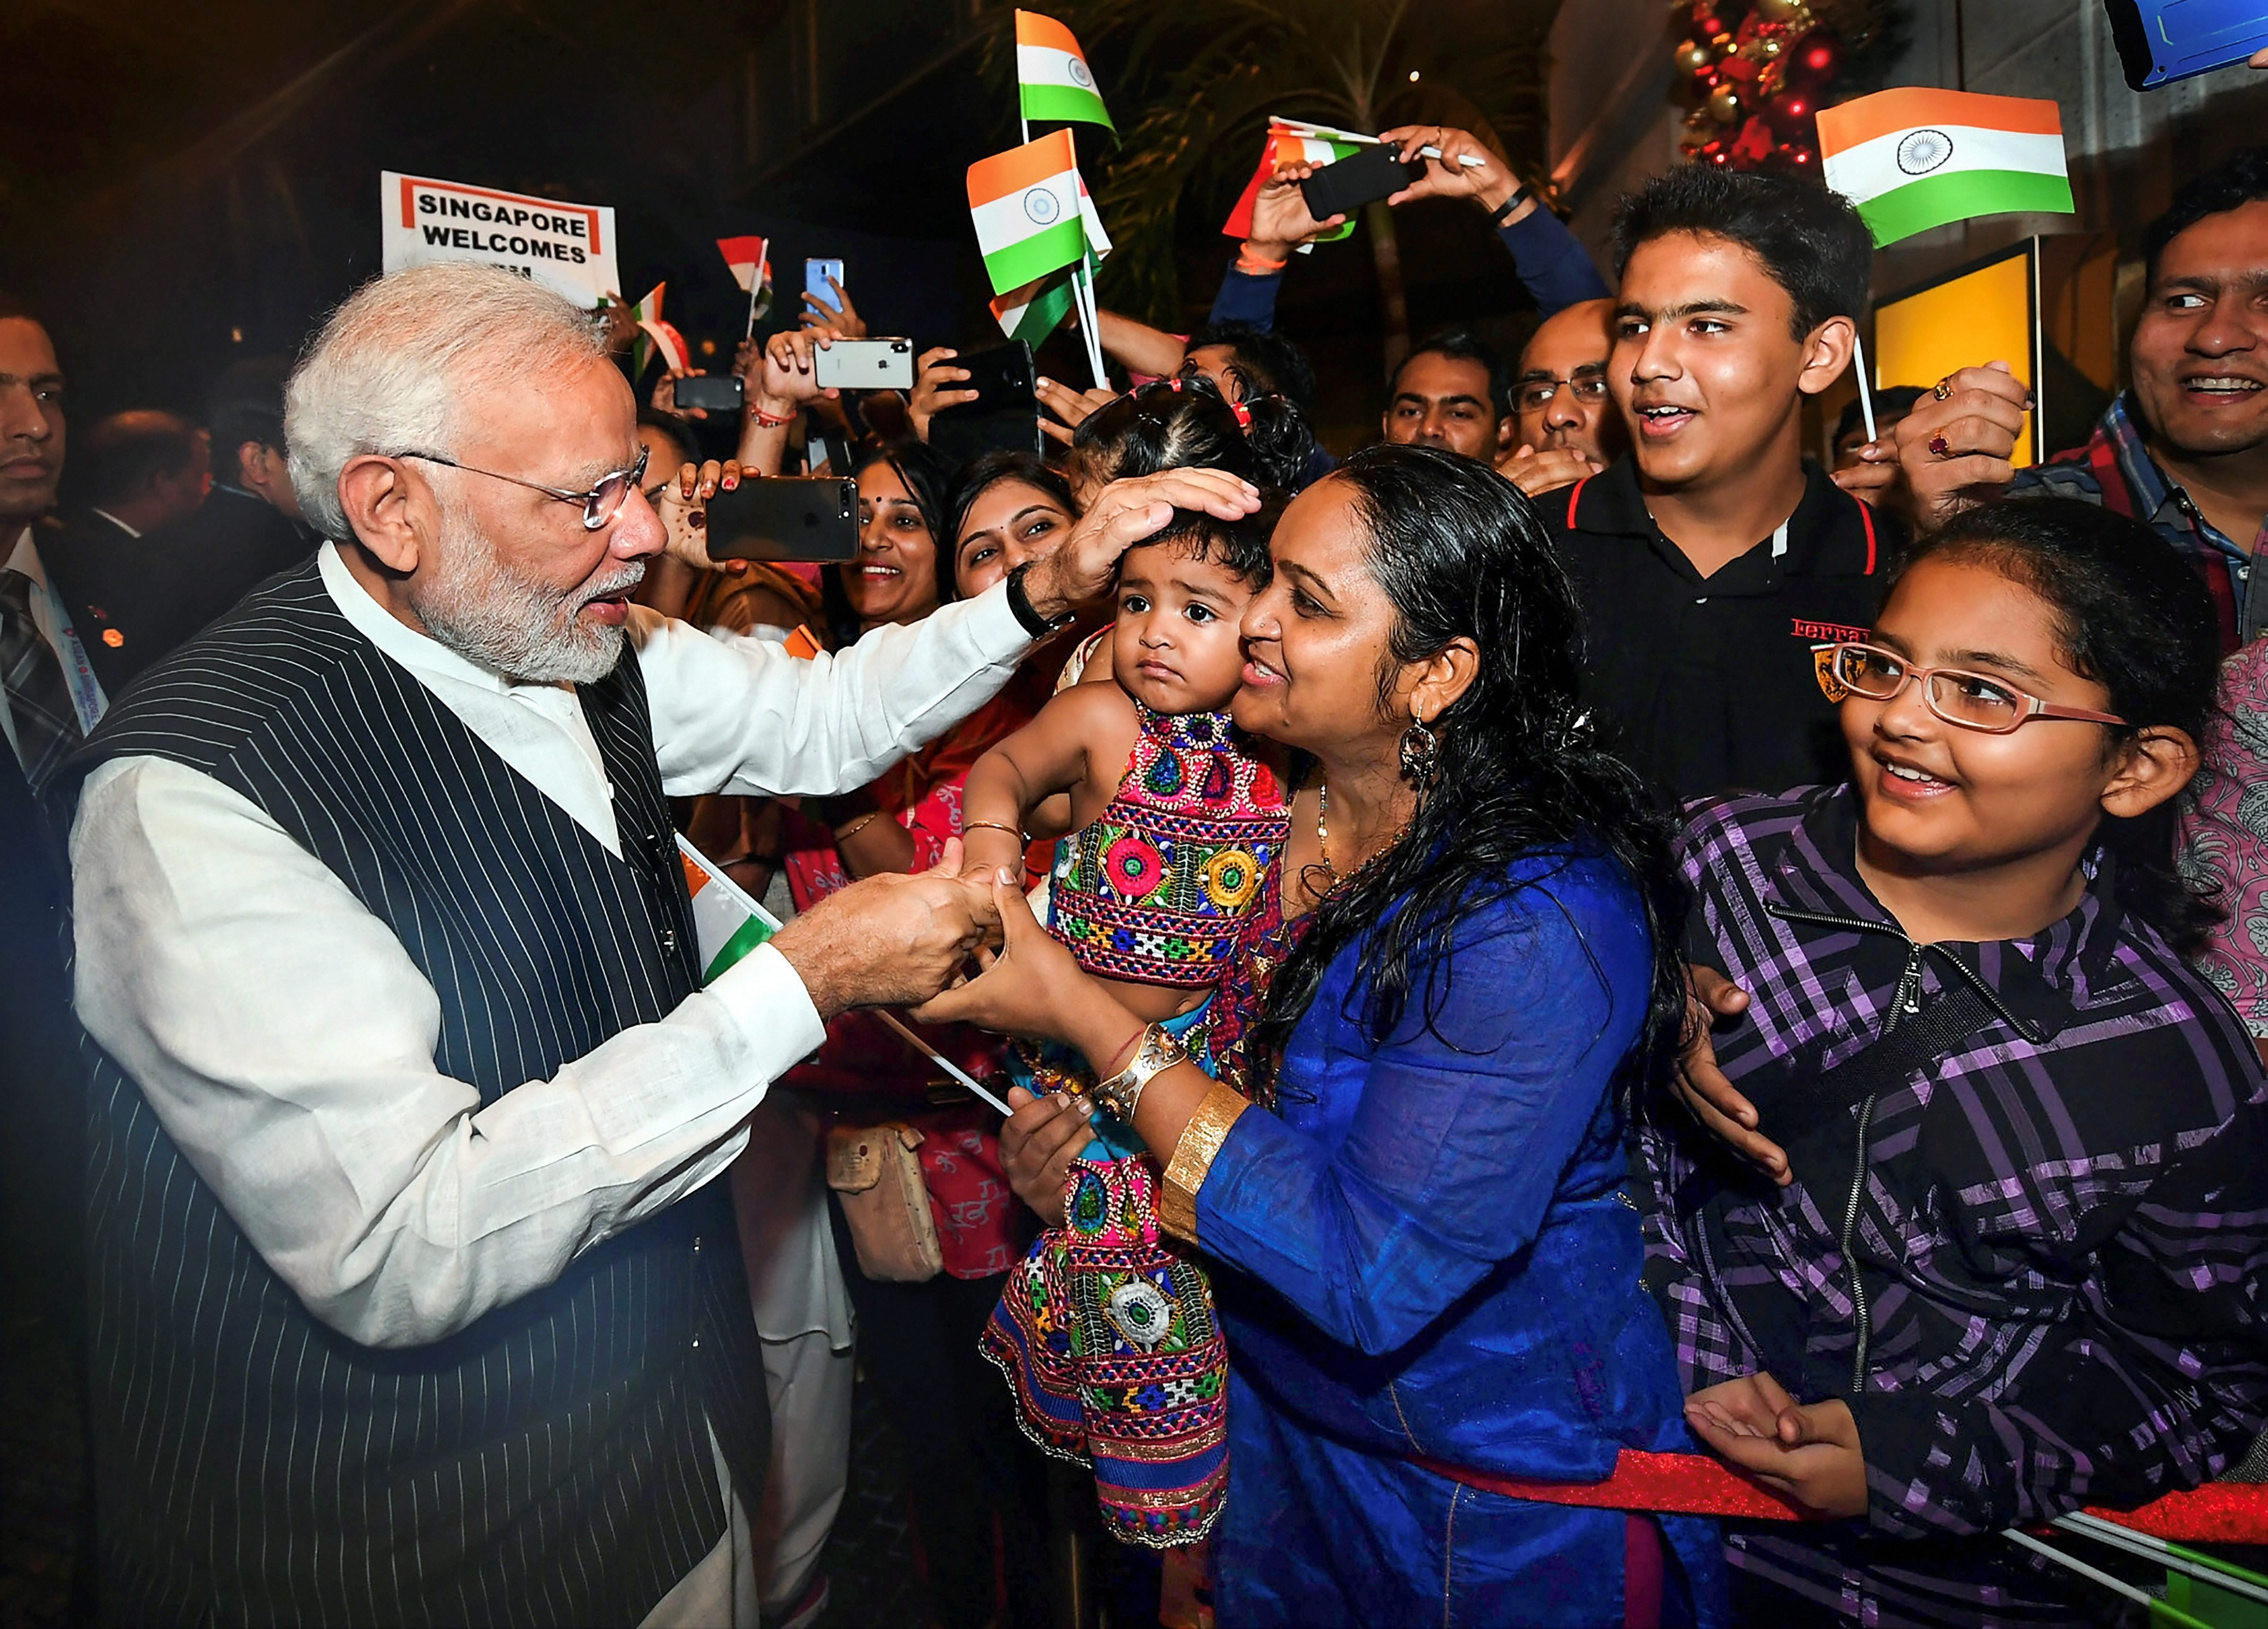 Narendra Modi is greeted by Indian residents after his arrival in Singapore.